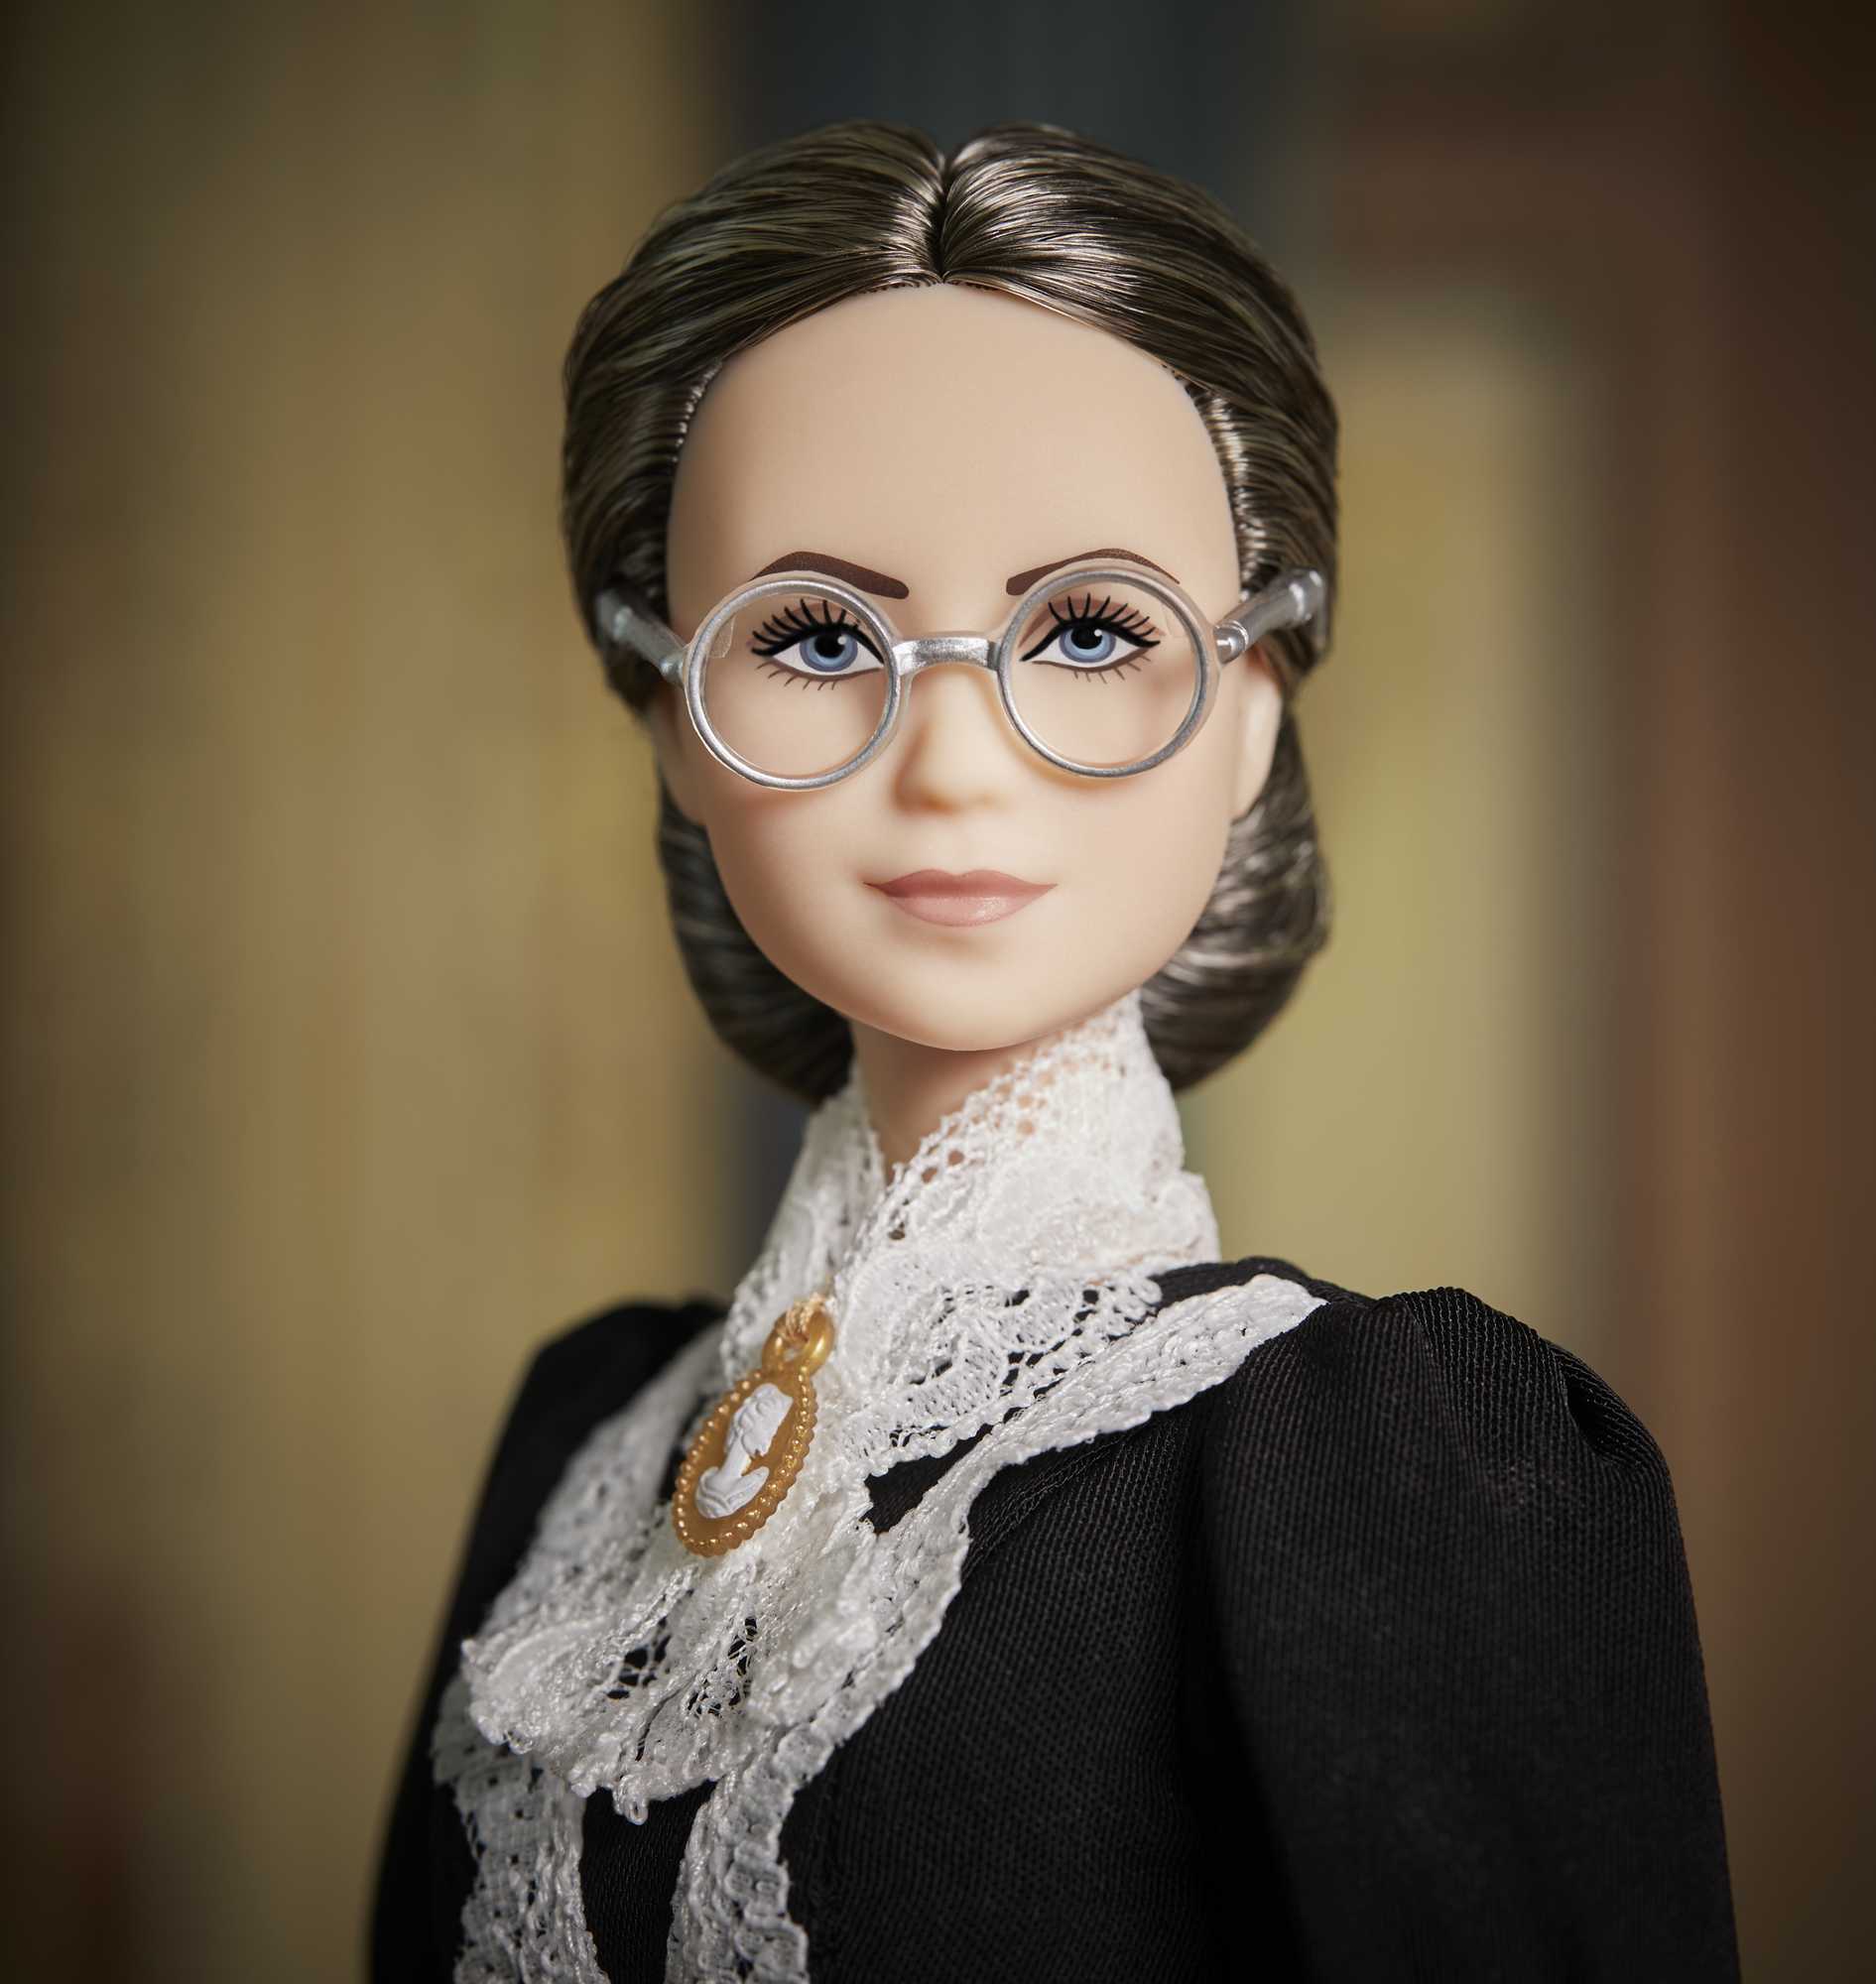 Barbie Inspiring Women Susan B. Anthony Collectible Doll in Black Dress with Doll Stand - image 4 of 7